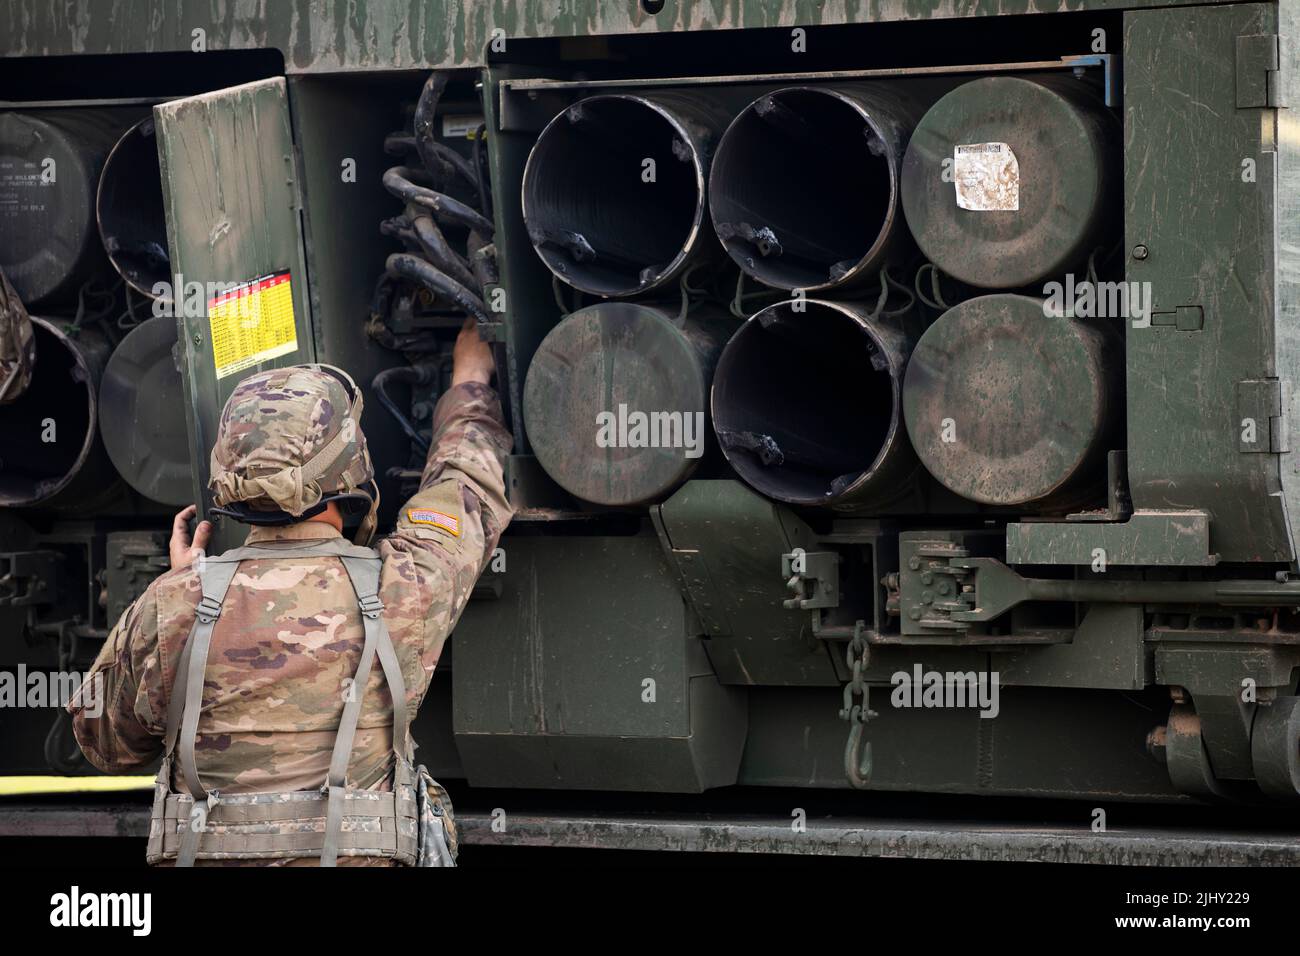 Fort Ripley, United States. 19 July, 2022. A U.S. Army National Guard soldiers with the 1-147th Field Artillery Regiment, prepares to launch rockets from a M270A1 Multiple Launch Rocket System during a live-fire training exercise at Camp Ripley, July 19, 2022 in Fort Ripley, Minnesota. Credit: Spc. Elizabeth Hackbarth/US Marines Photo/Alamy Live News Stock Photo